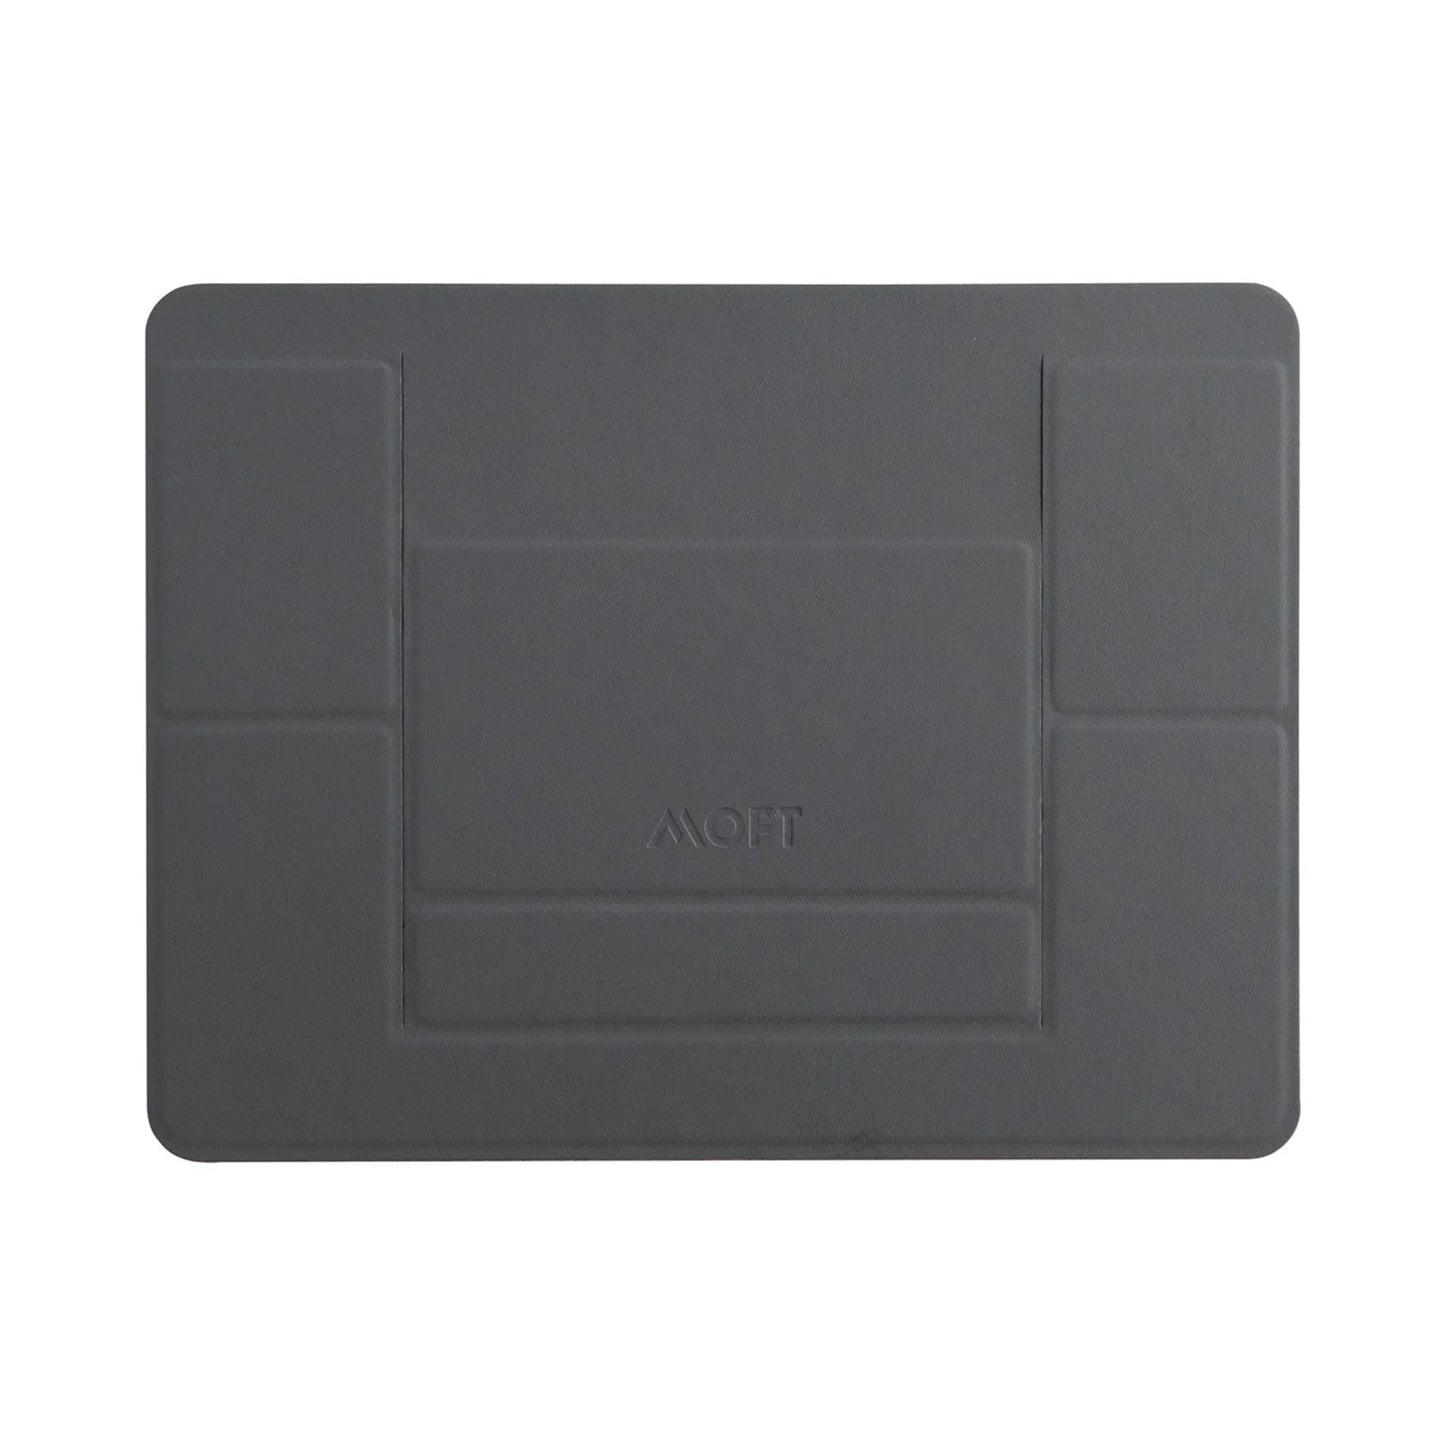 MOFT Air-Flow Foldable Laptop Stand - Space Gray